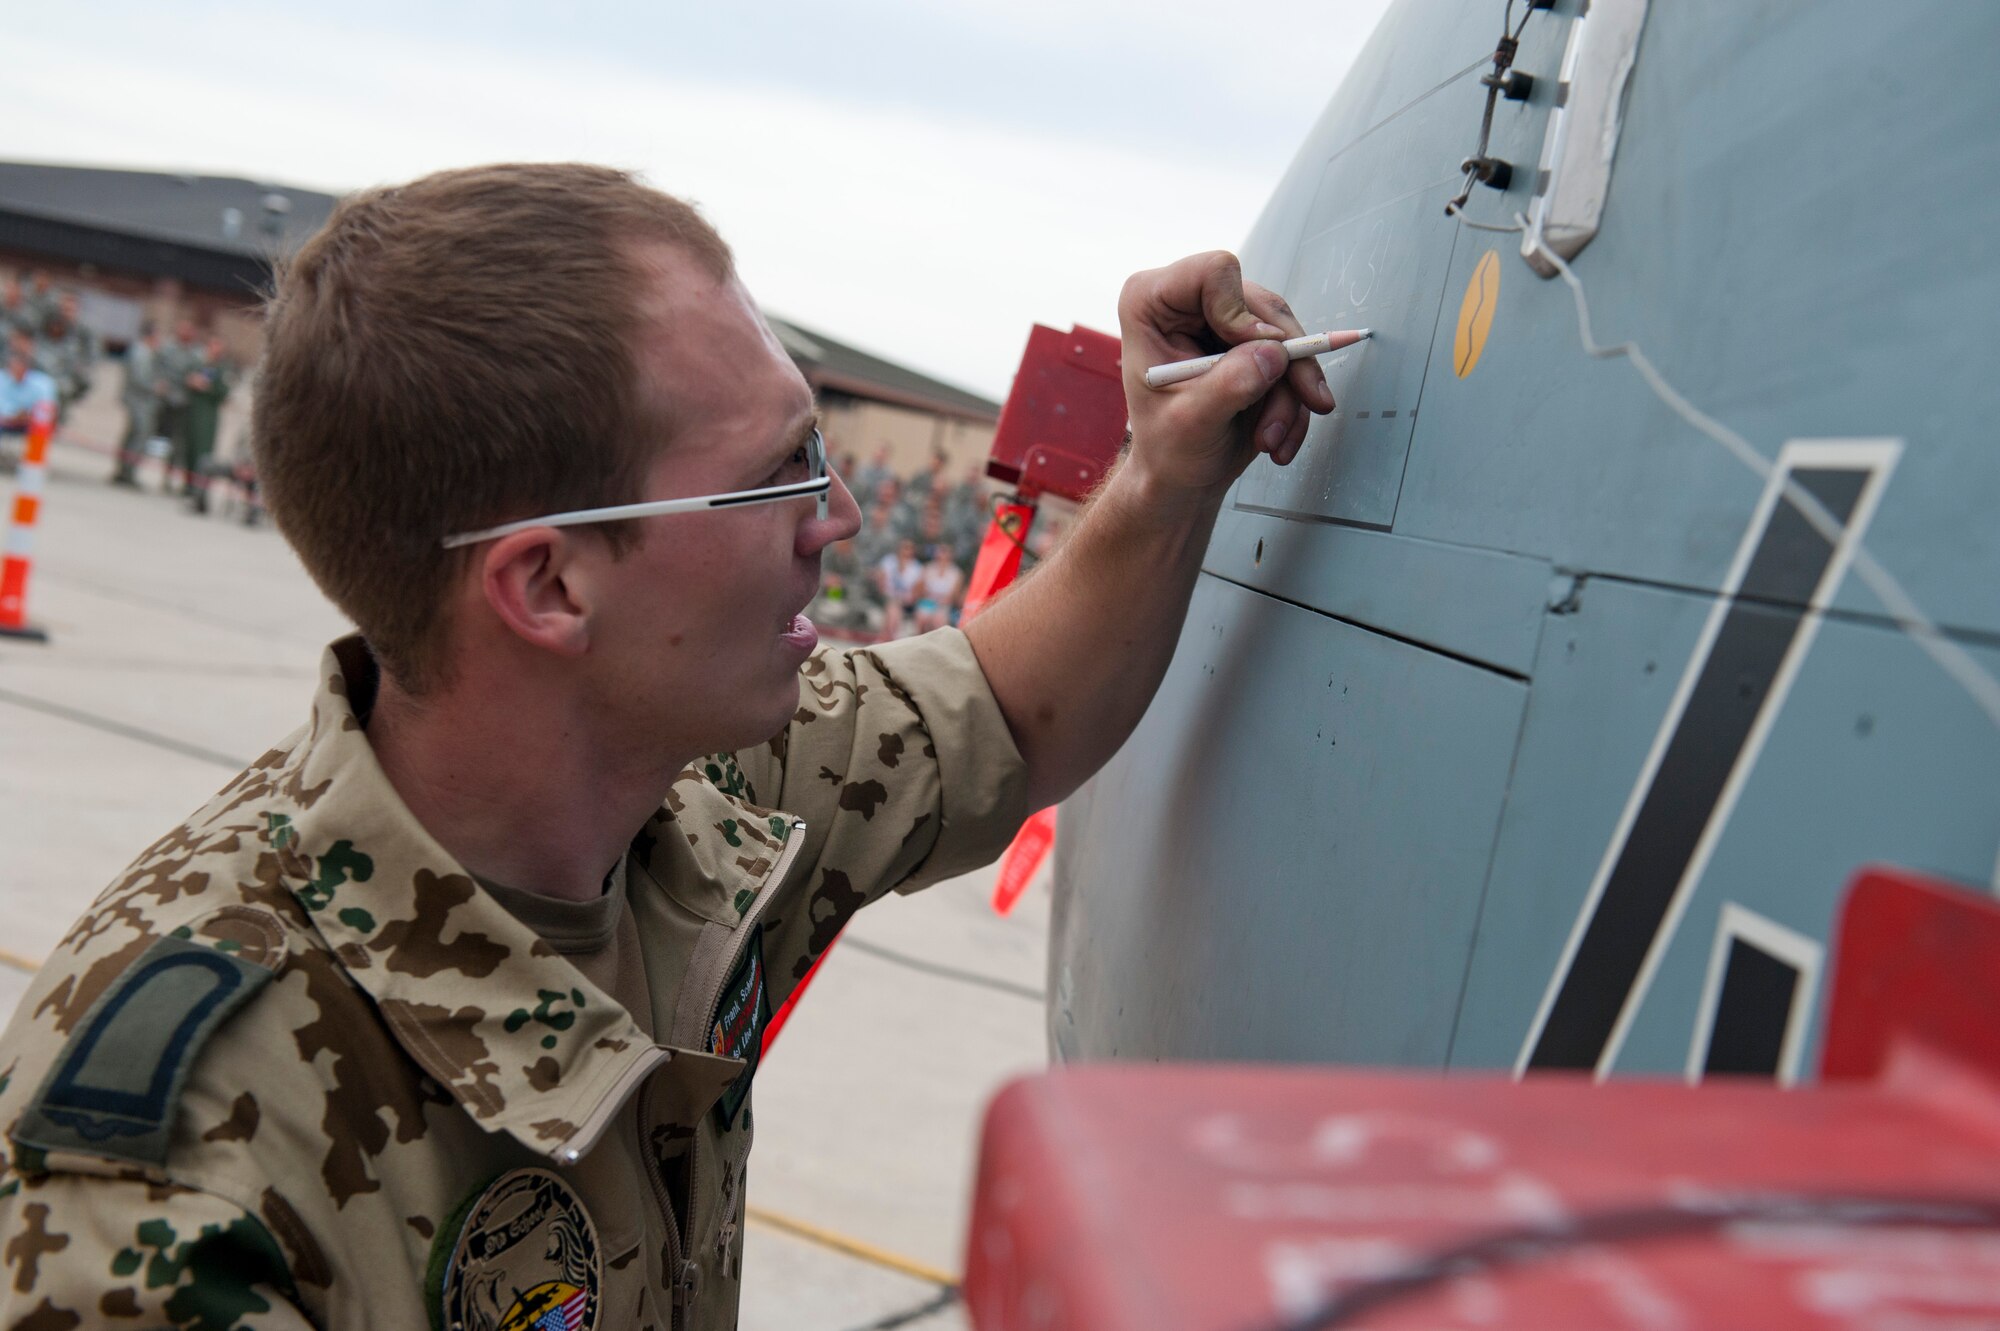 Staff Sgt. Frank Schwetzler, German Air Force Flying Training Center crew chief, writes pertinent information onto the airframe of a Tornado jet aircraft during a quarterly load-crew competition at Holloman Air Force Base, N.M., April 5. The GAF competed in the load-crew competition to have their skills evaluated alongside the F-22 Raptor aircraft and MQ-9 Reaper aircraft load-crews. For the competition, points are awarded during the weapons-loading, tool kit inspection, and uniform inspection. (U.S. Air Force photo by Airman First Class Daniel Liddicoet/Released)